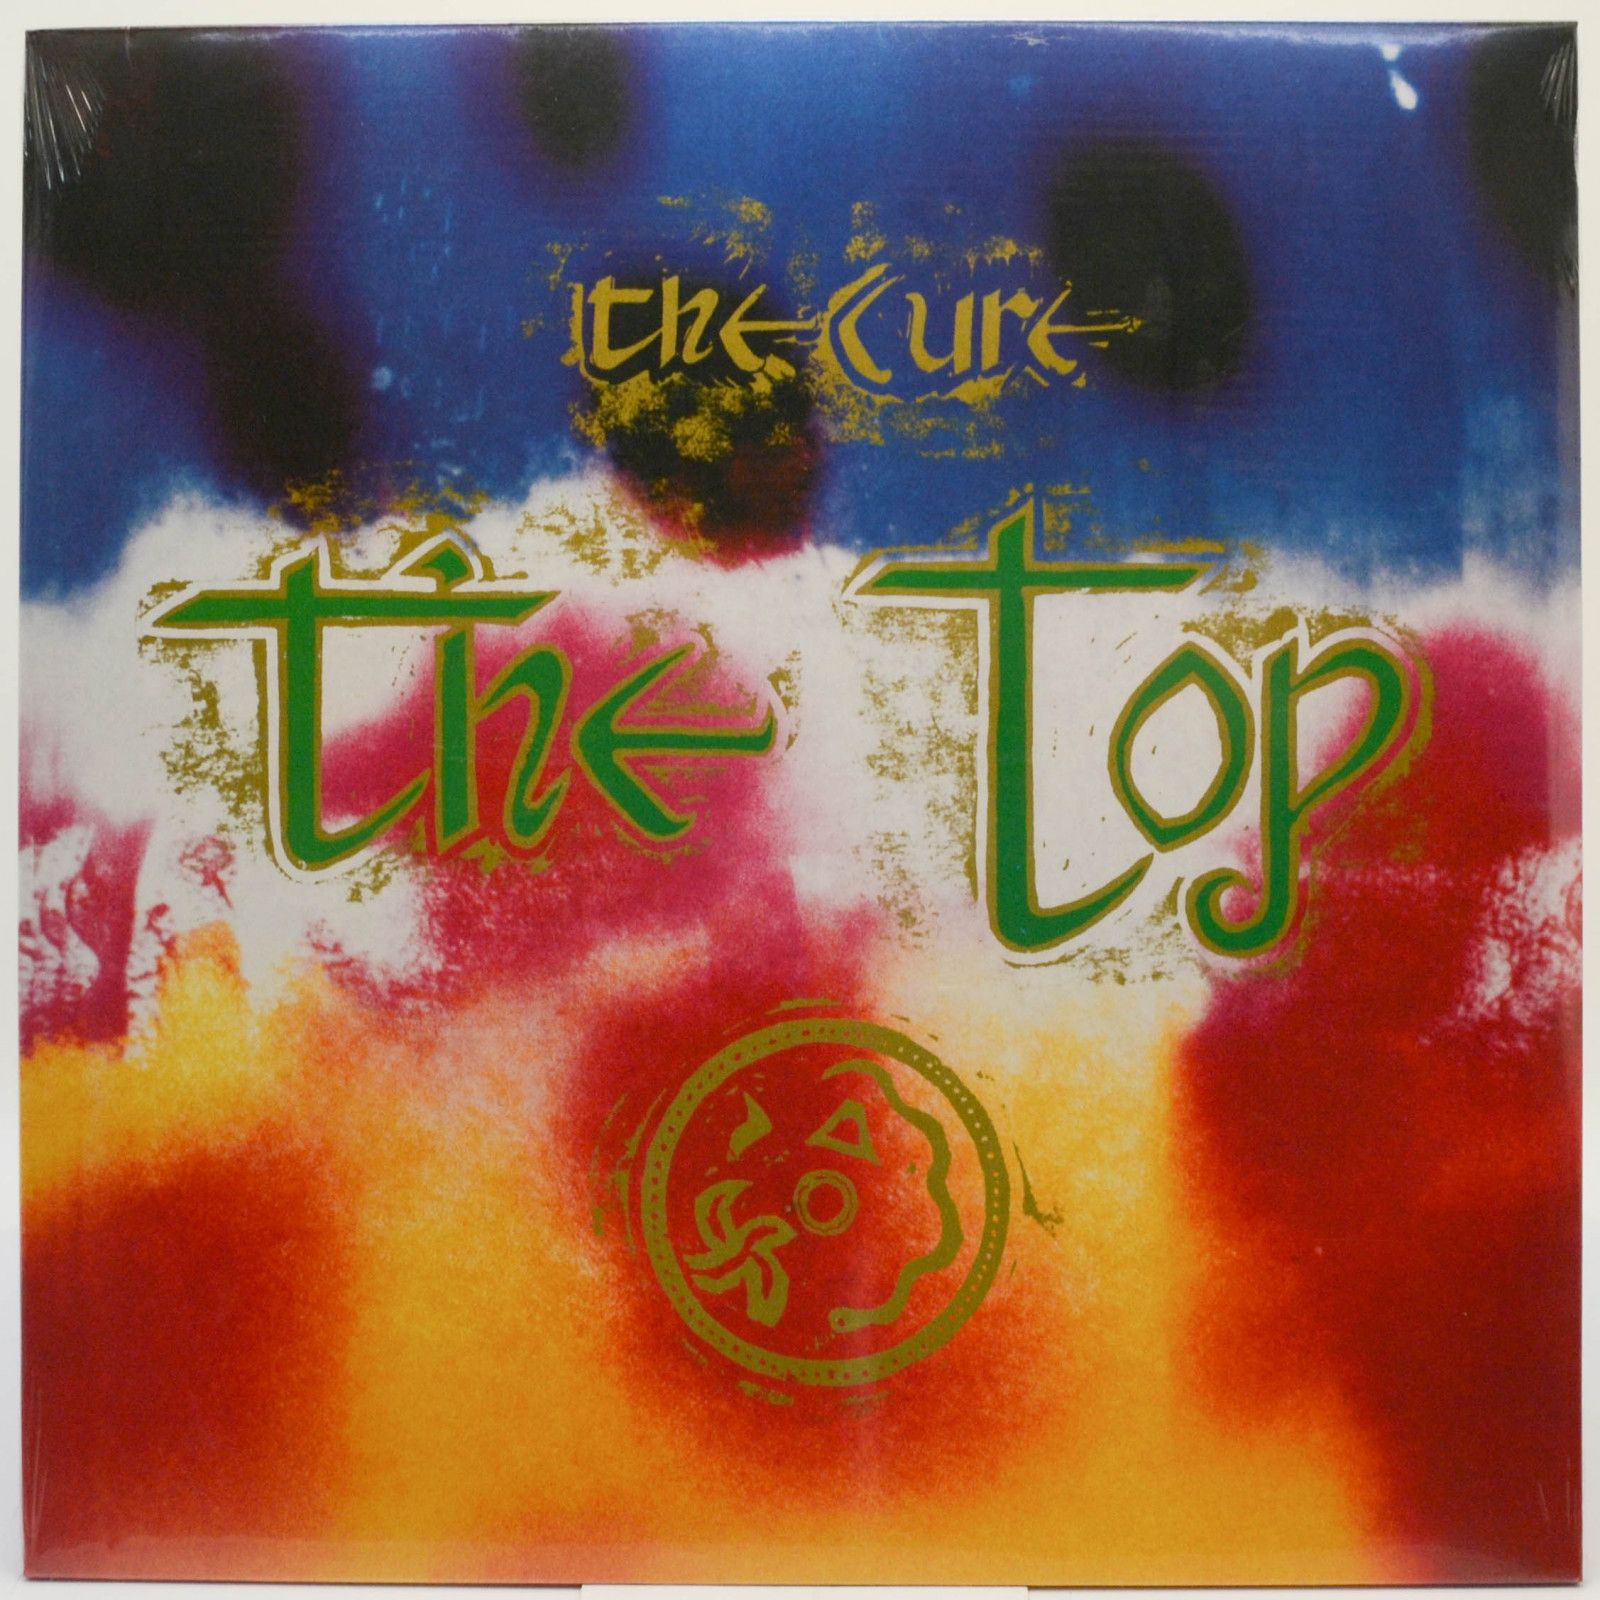 Cure — The Top, 1984